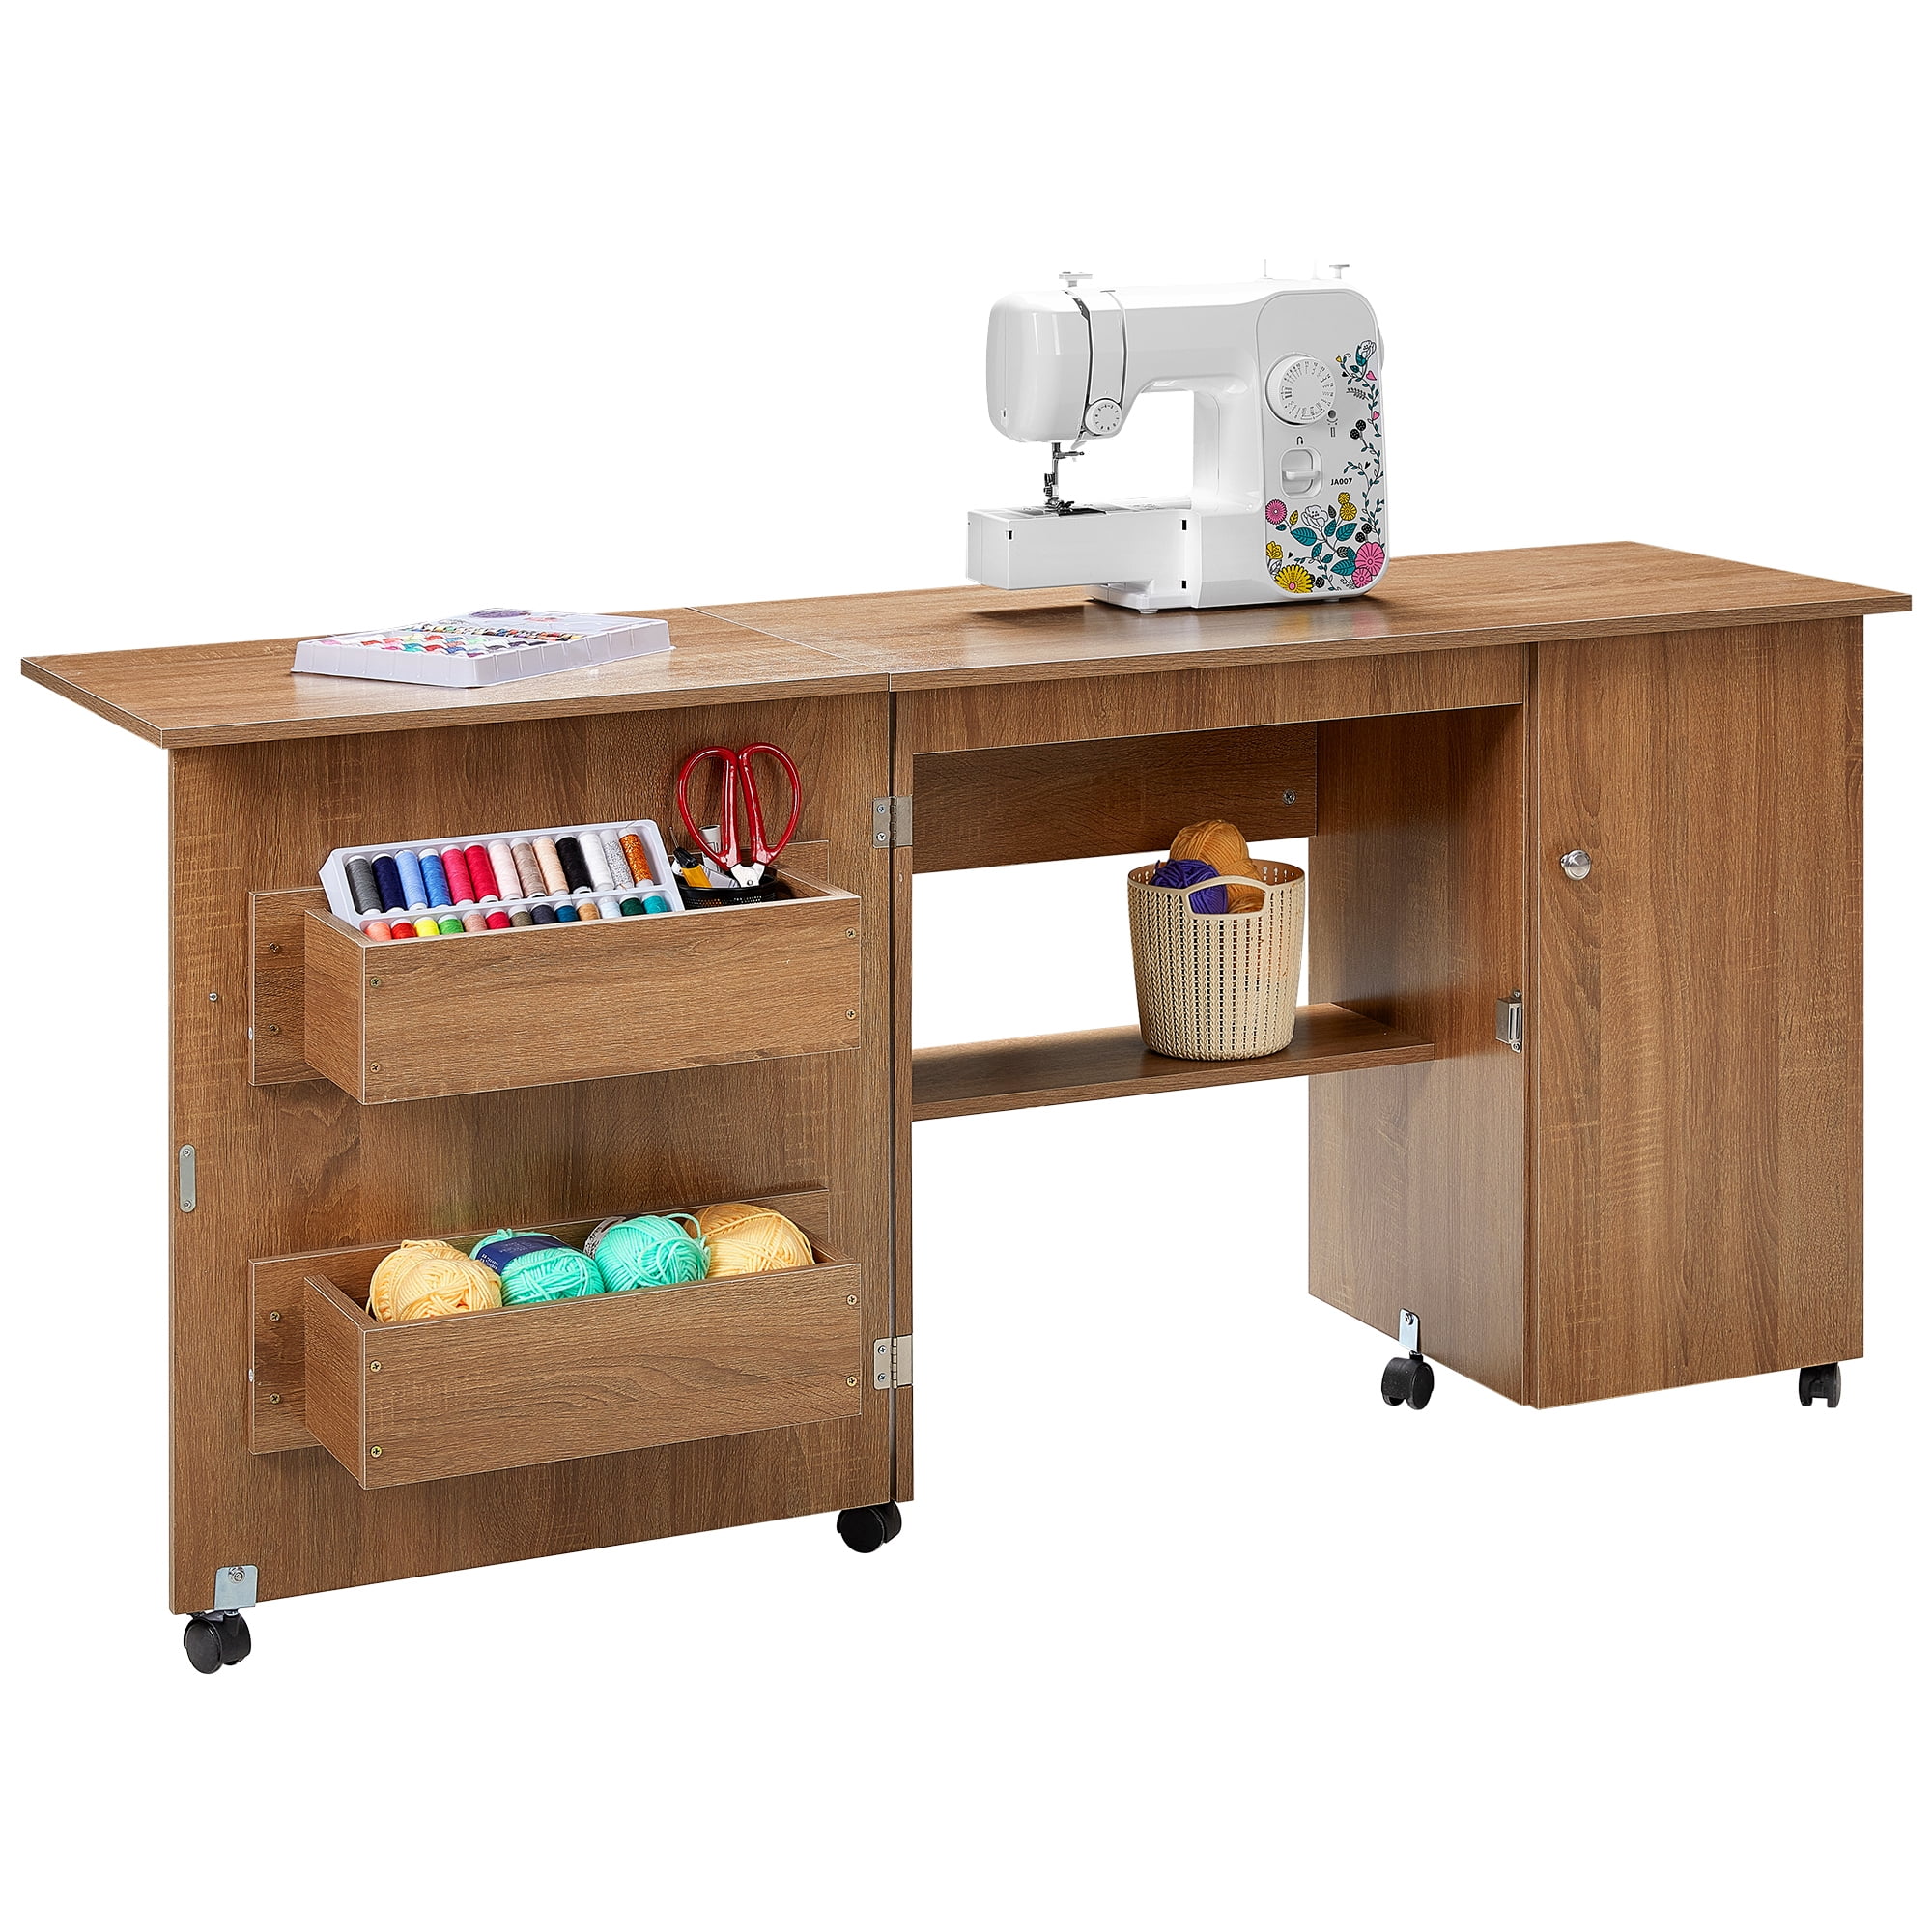 Folding Sewing Table In other Sewing Machine Accessories for sale